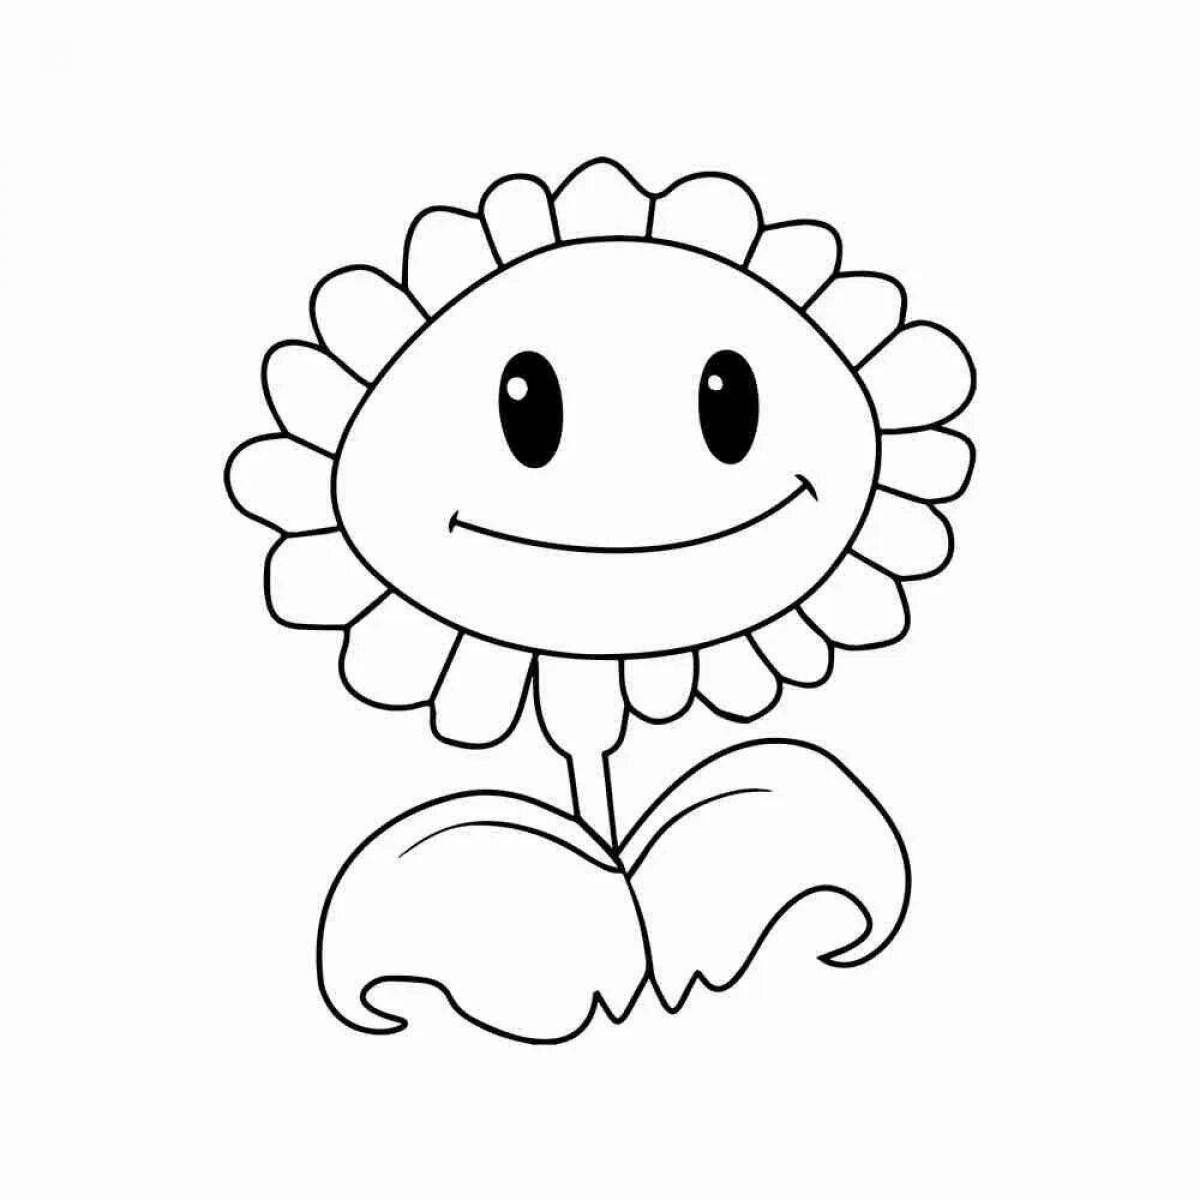 Coloring page incredible pea shooter plants vs zombies